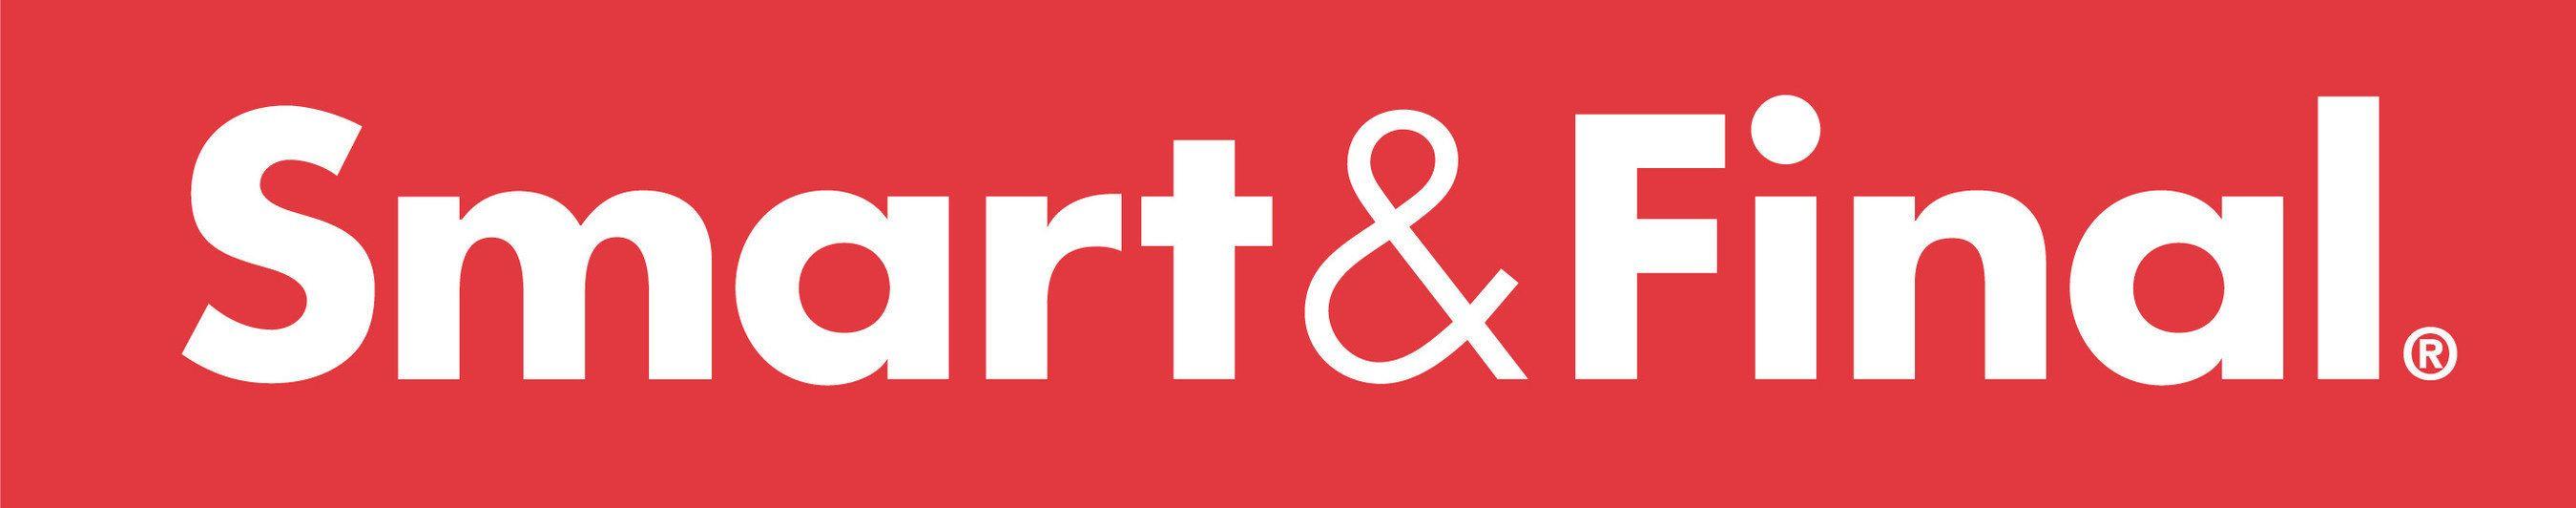 Smart and Final Logo - Smart & Final Stores, Inc. Reports Fourth Quarter and Full Year 2017 ...